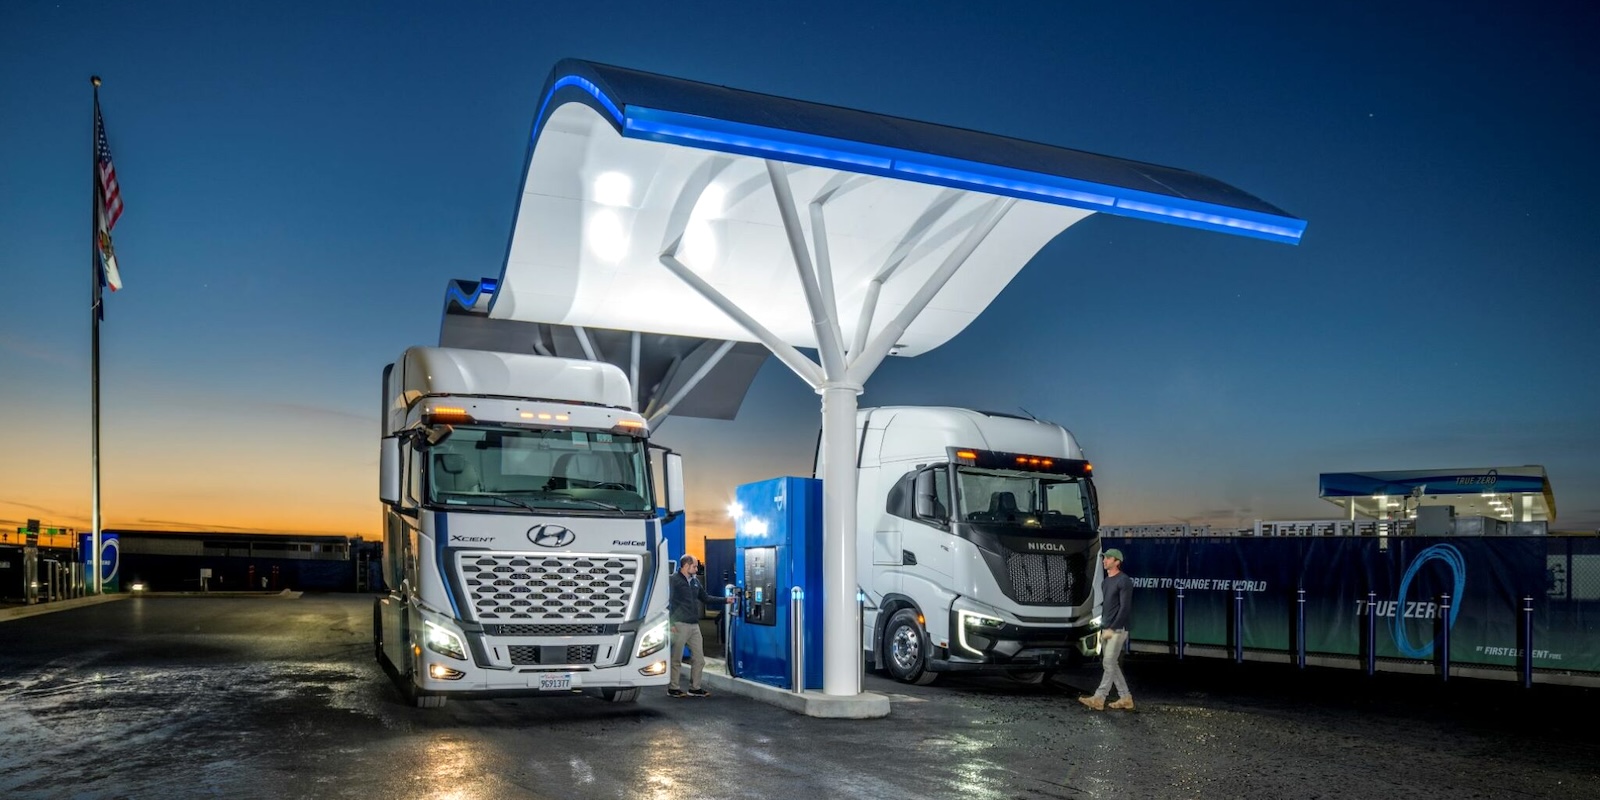 World’s first hydrogen station for commercial trucks opens – is it too late? – Electrek